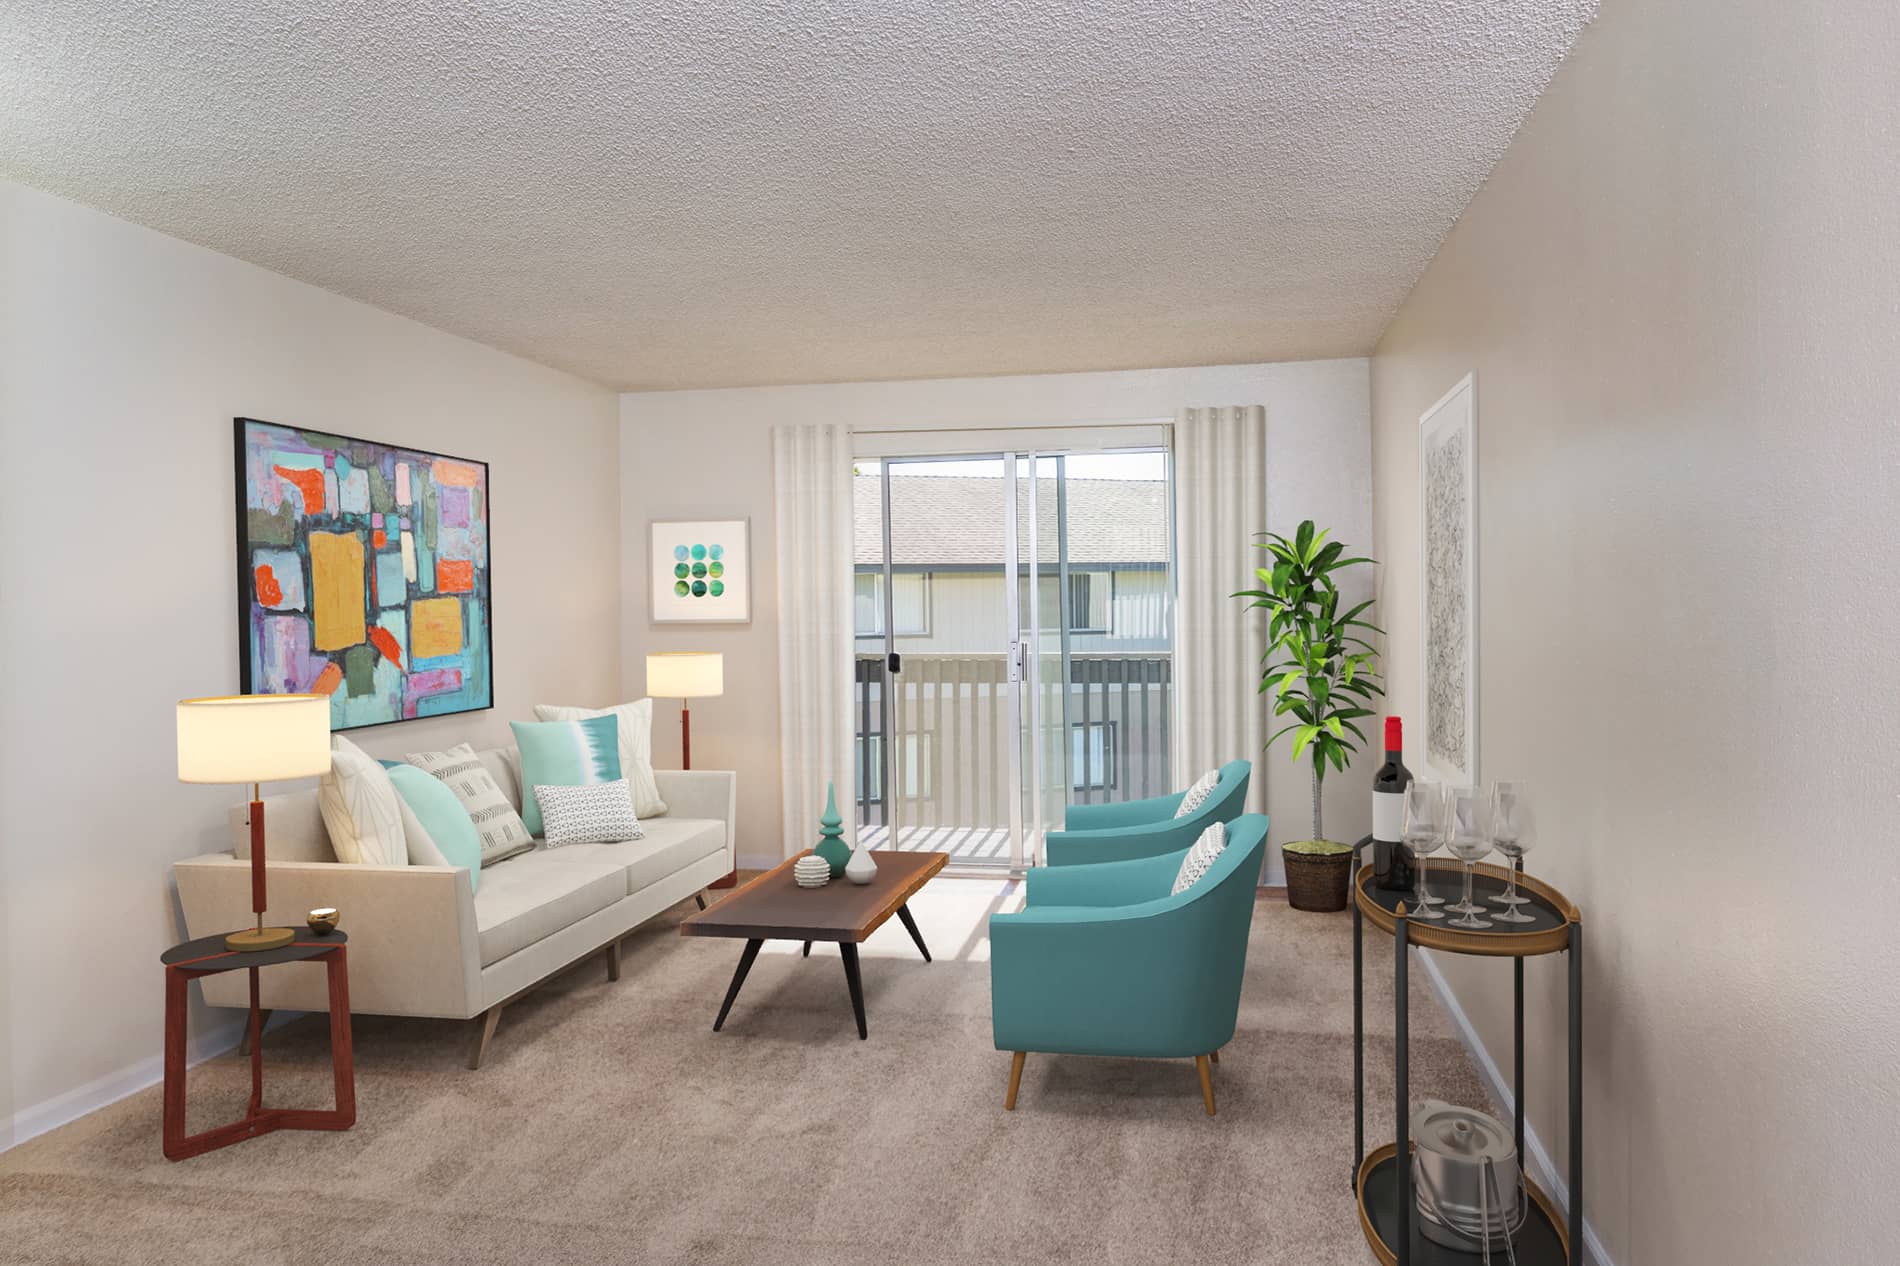 Pointe at Northridge apartment living room staged by Rooomy